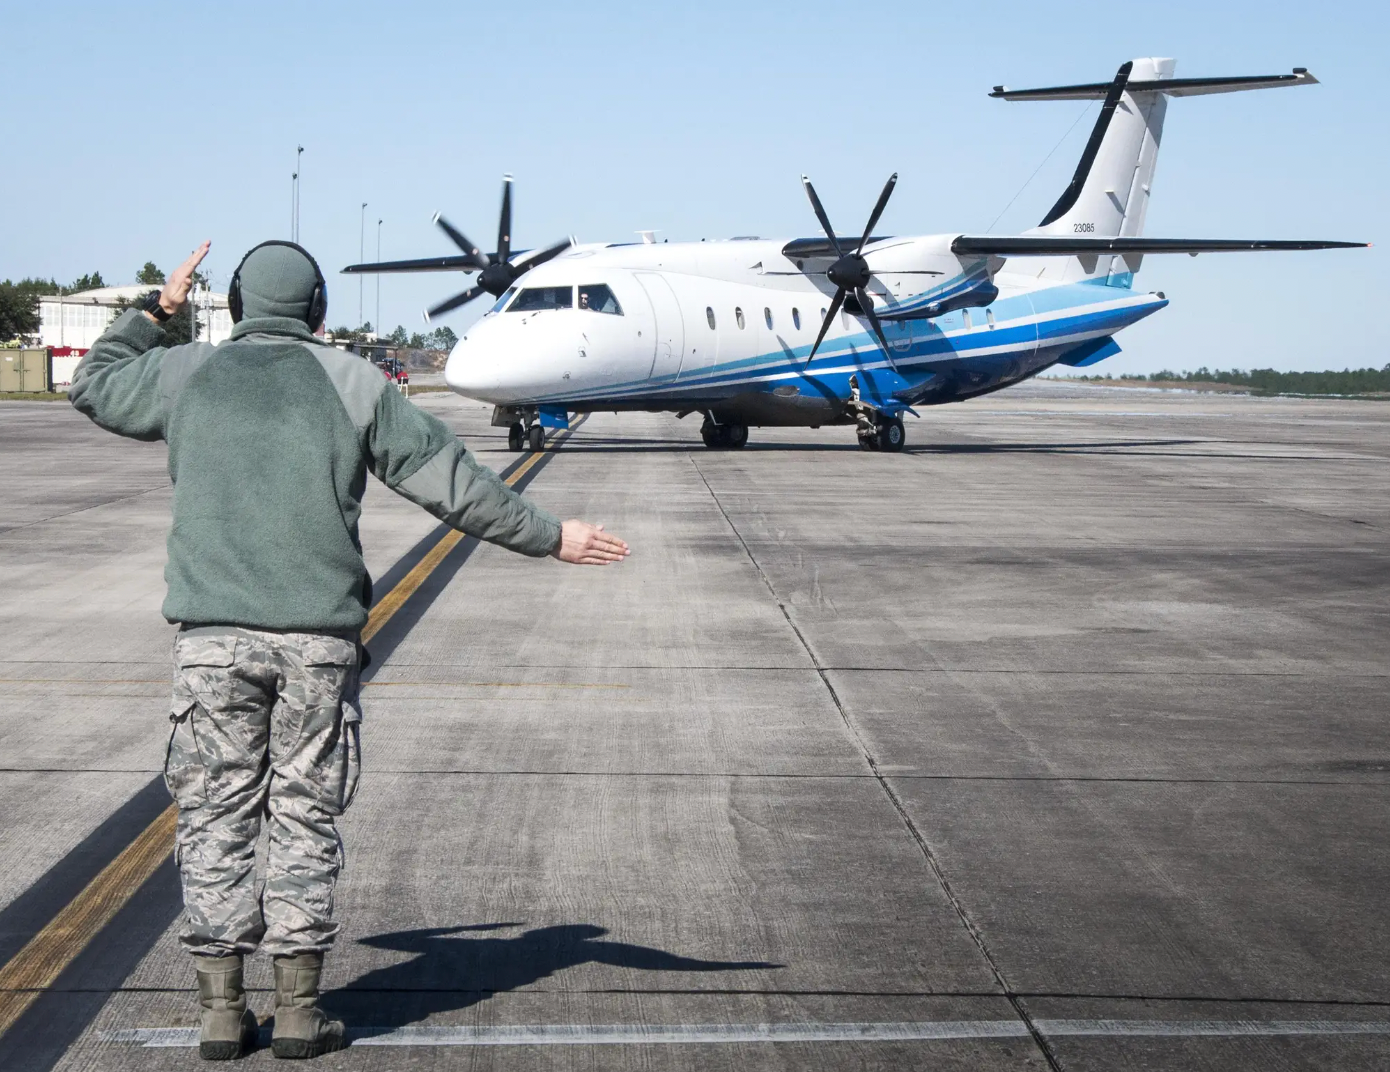 A C-146A Wolfhound from the 919th Special Operations Wing taxies on the Duke Field flight line, during Exercise Northern Strike, which also involved a highway exercise, on a stretch of the Michigan State Highway M-32.&nbsp;<em>U.S. Air Force/Dan Neely</em><br>